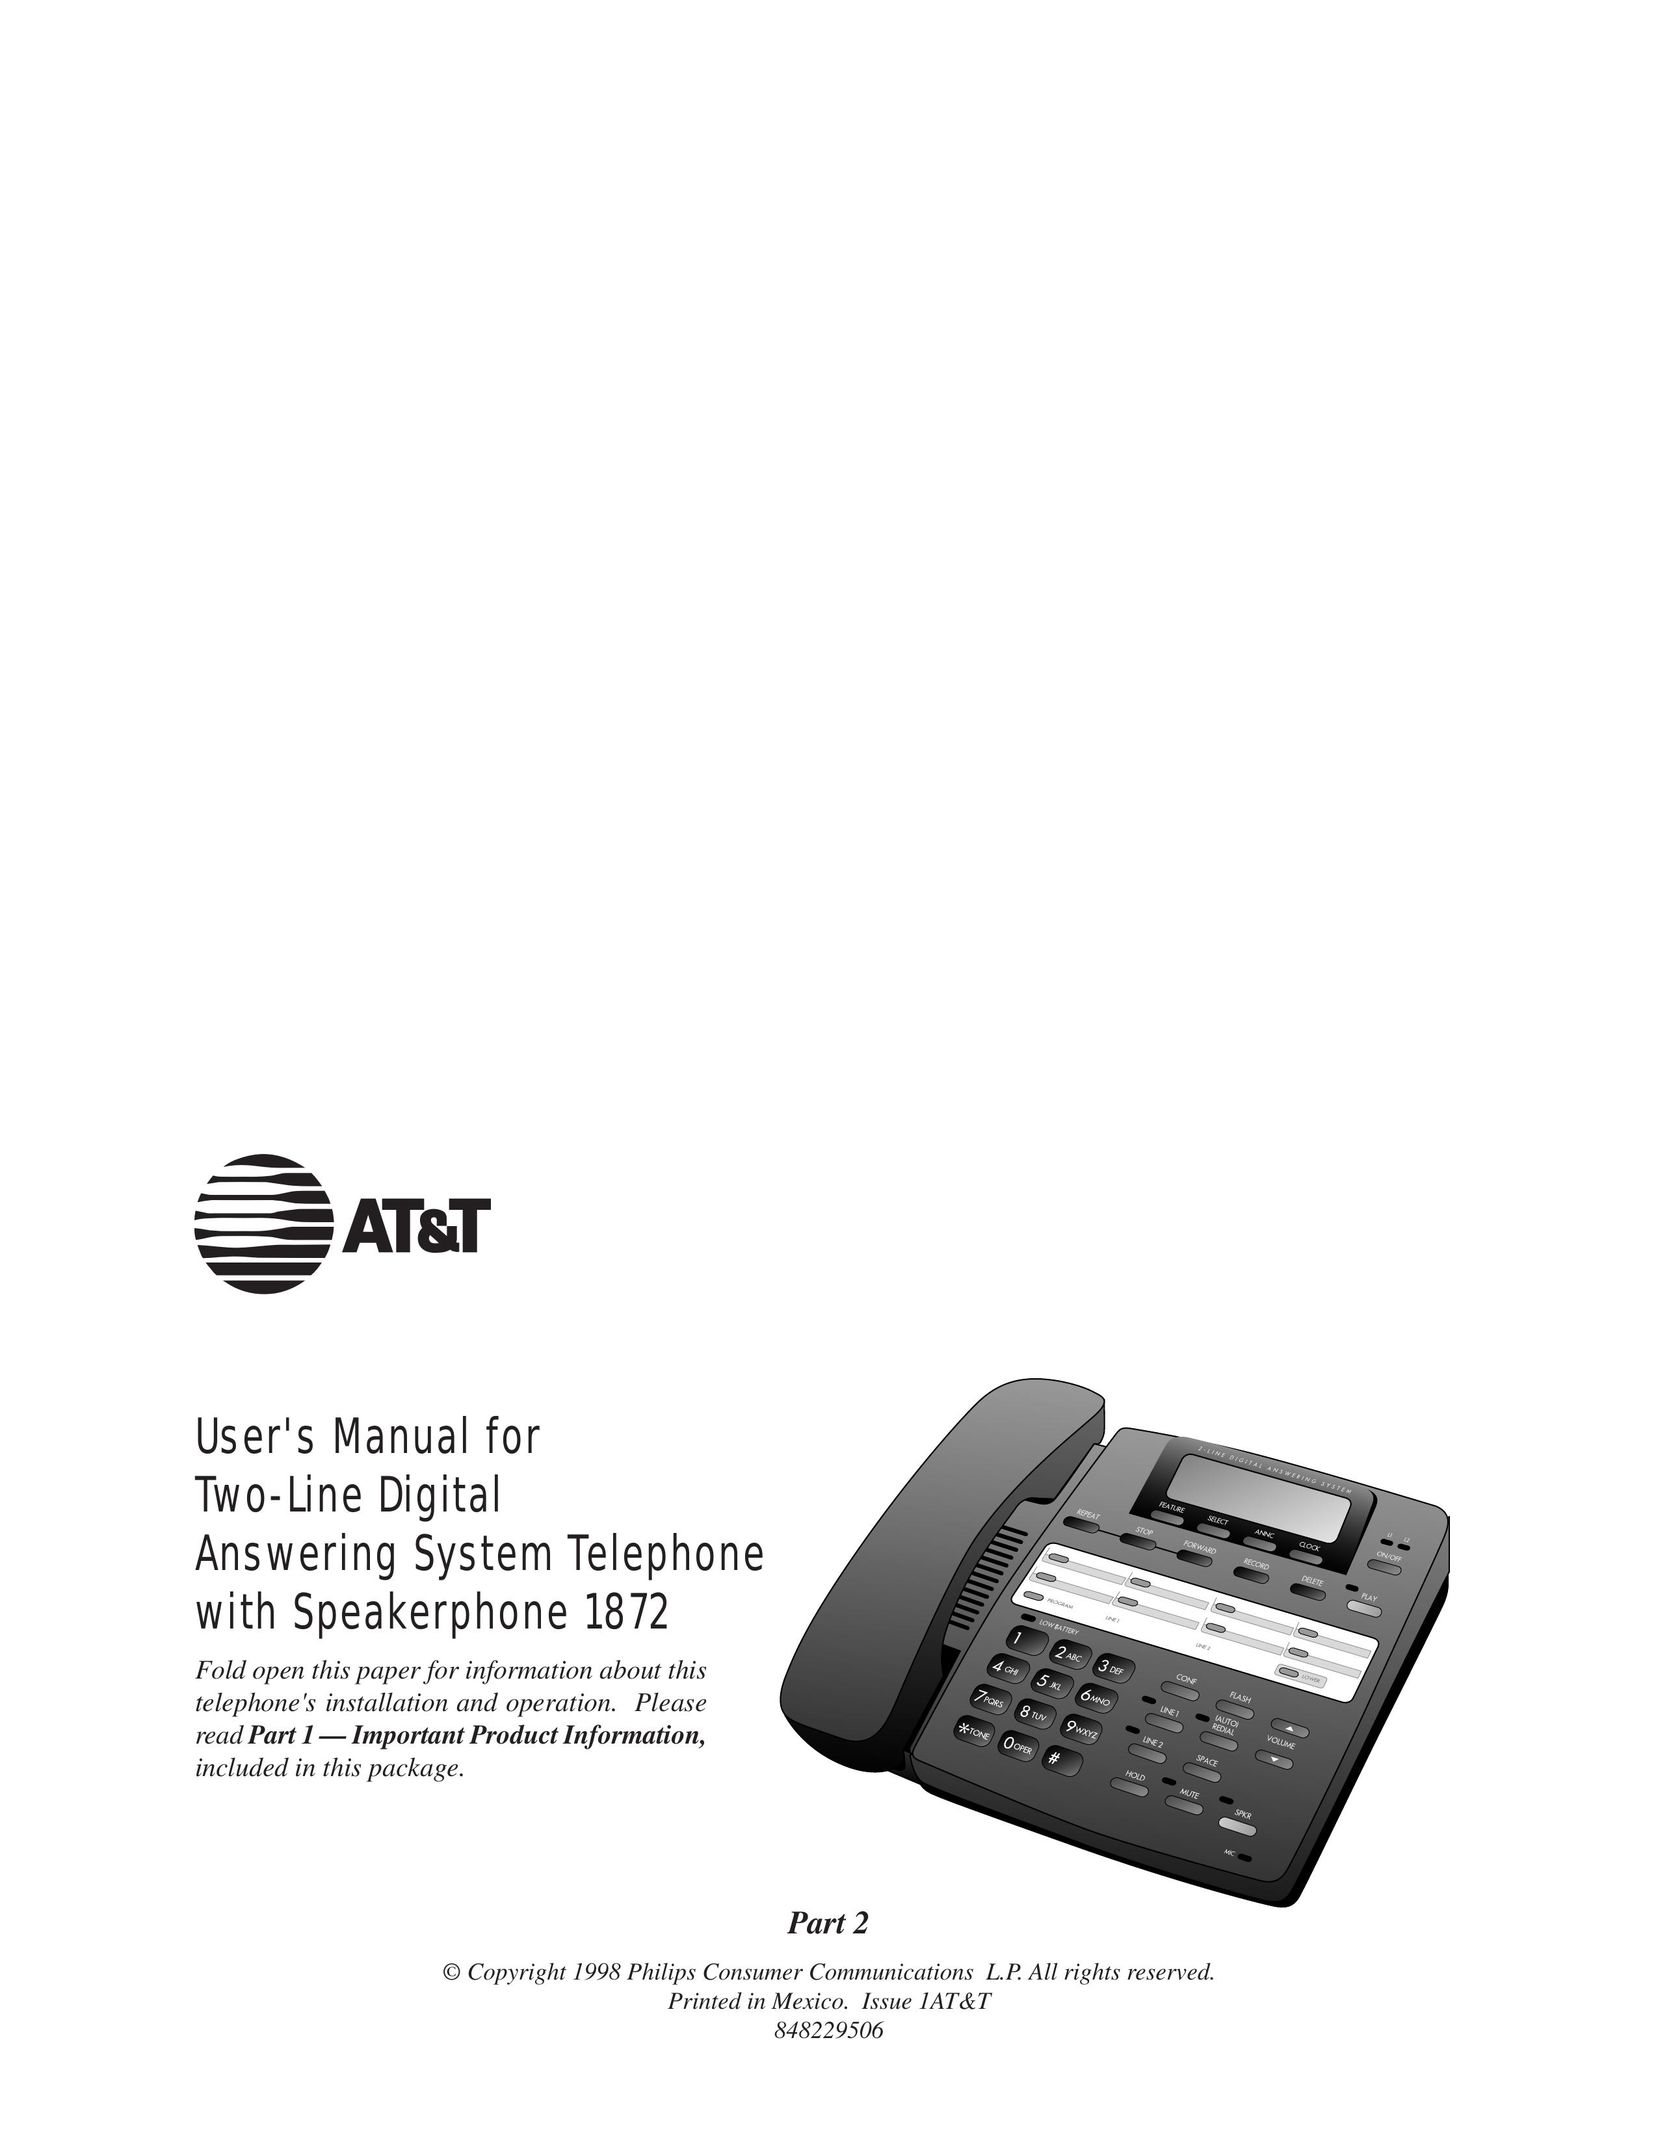 AT&T 1872 Conference Phone User Manual (Page 1)